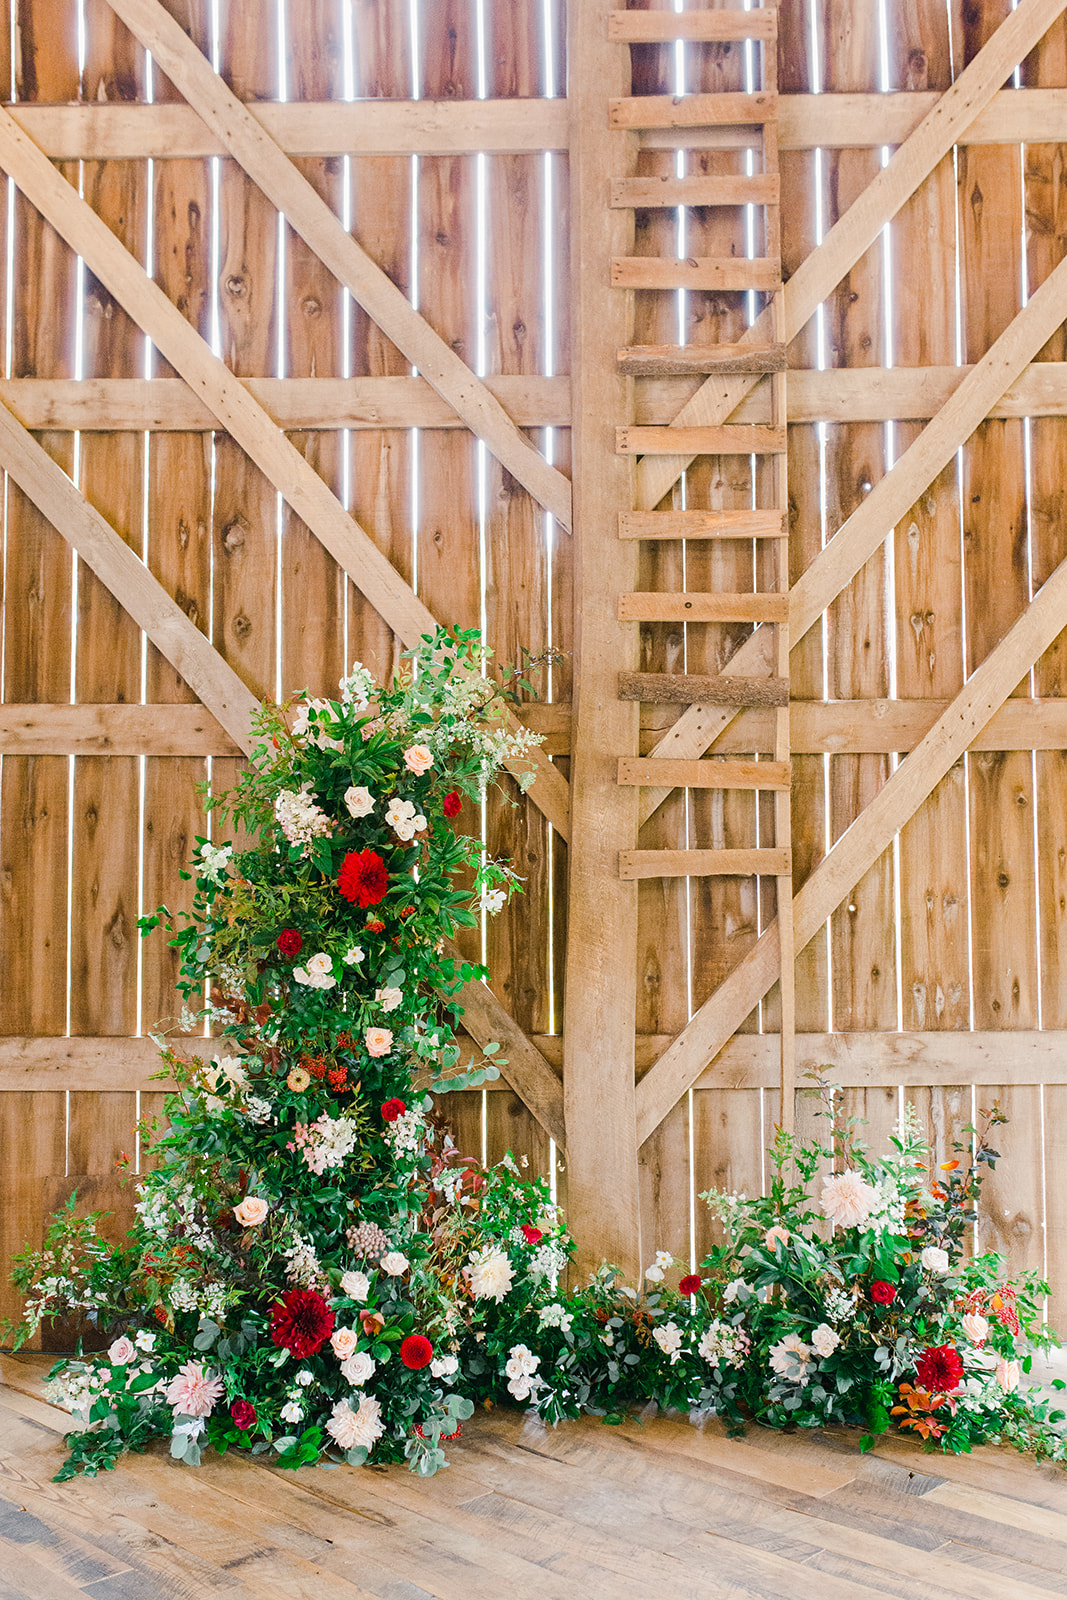 floral backdrop for a wedding ceremony in a rustic wisconsin barn by Studio Fleurette.